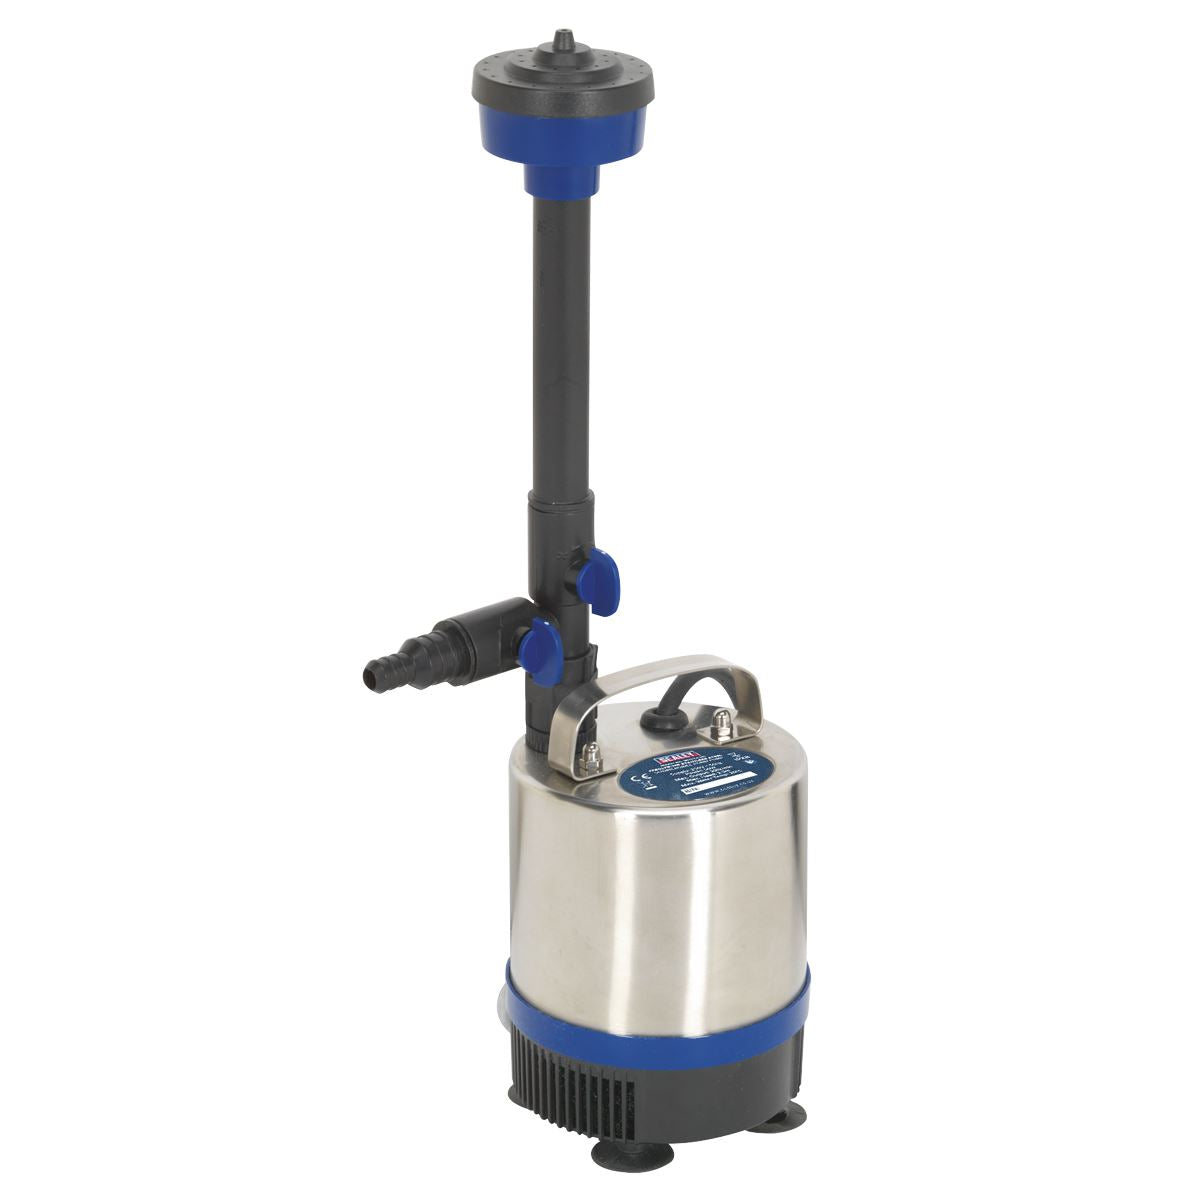 Sealey Submersible Pond Pump Stainless Steel 1750L/hr 230V